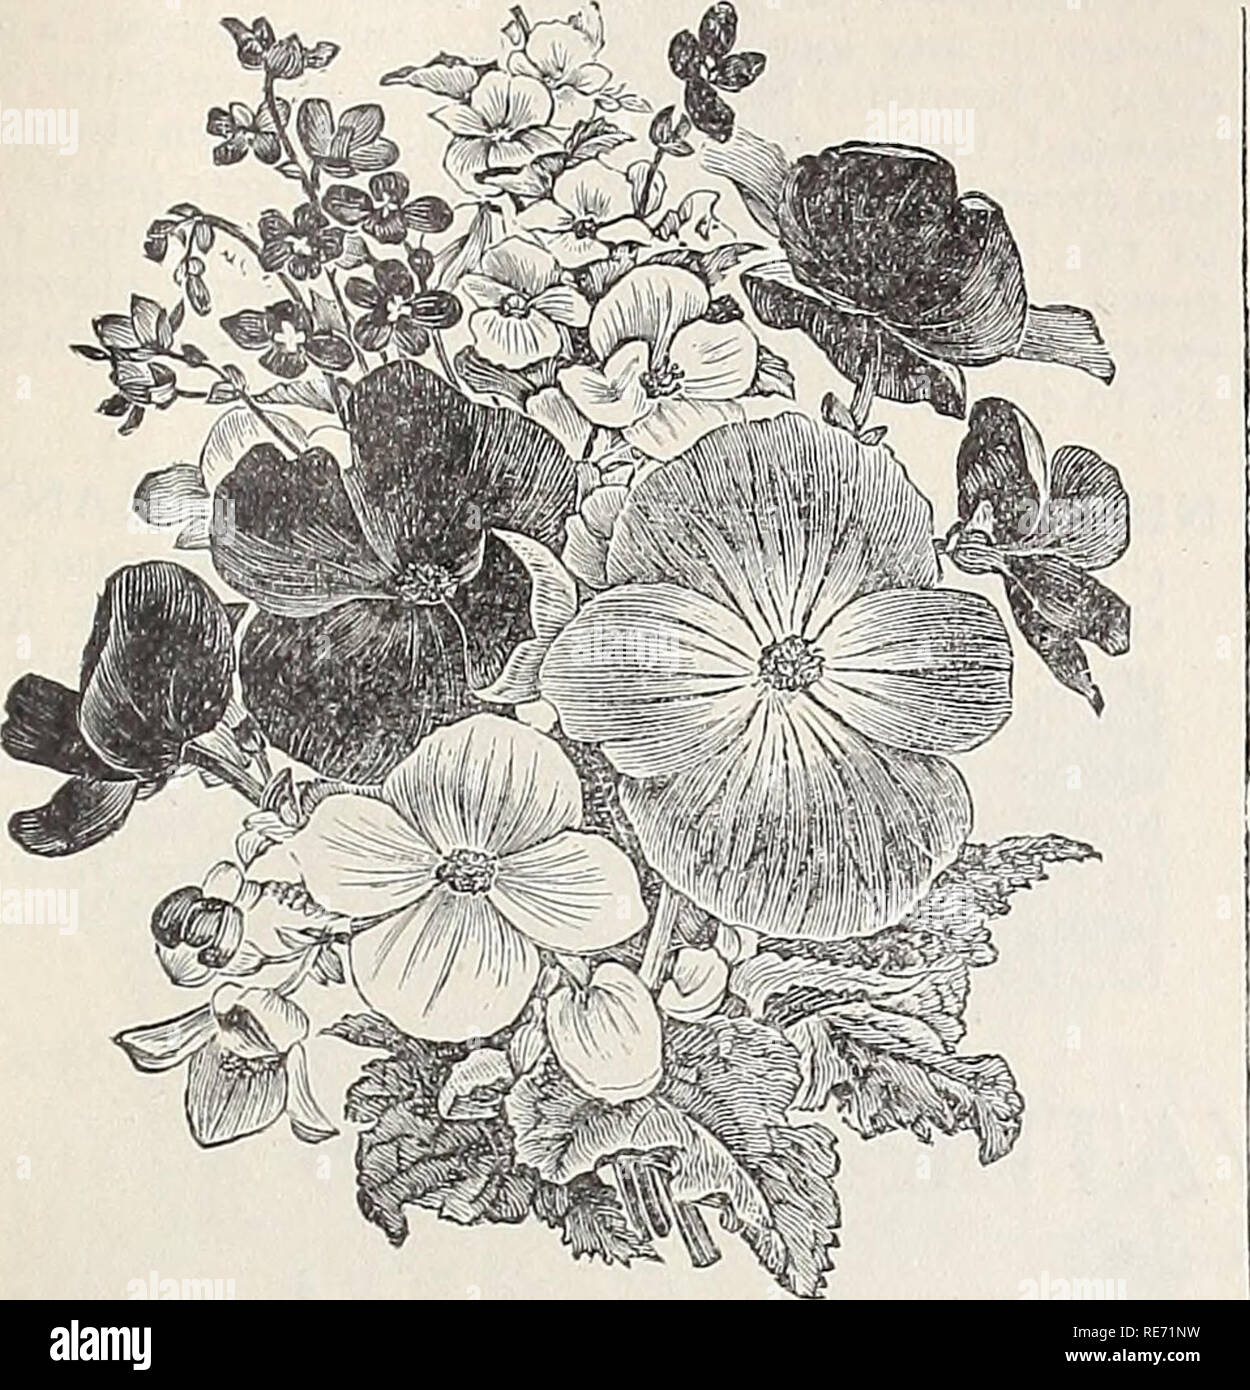 . Cox seed and plant co. catalogue. Seed industry and trade Catalogs; Seeds Catalogs; Flowers Seeds Catalogs; Fruit Seeds Catalogs; Plants, Ornamental Catalogs; Trees Catalogs. BEGONIA. BEGONIAS (Tube, -ous-Rooted) — We have im- ported direct from Mr. John Laing, of England „ new Single and Double Begonia Roots. The flowers are borne on upright stiff stems and often exceed 5 inches in diameter when well grown. Nothing can exceed the brilliancy of their waxy flowers. Will do well in the open air during the spring and sum- mer months. They make a fine plant for window or conservatory decorations Stock Photo